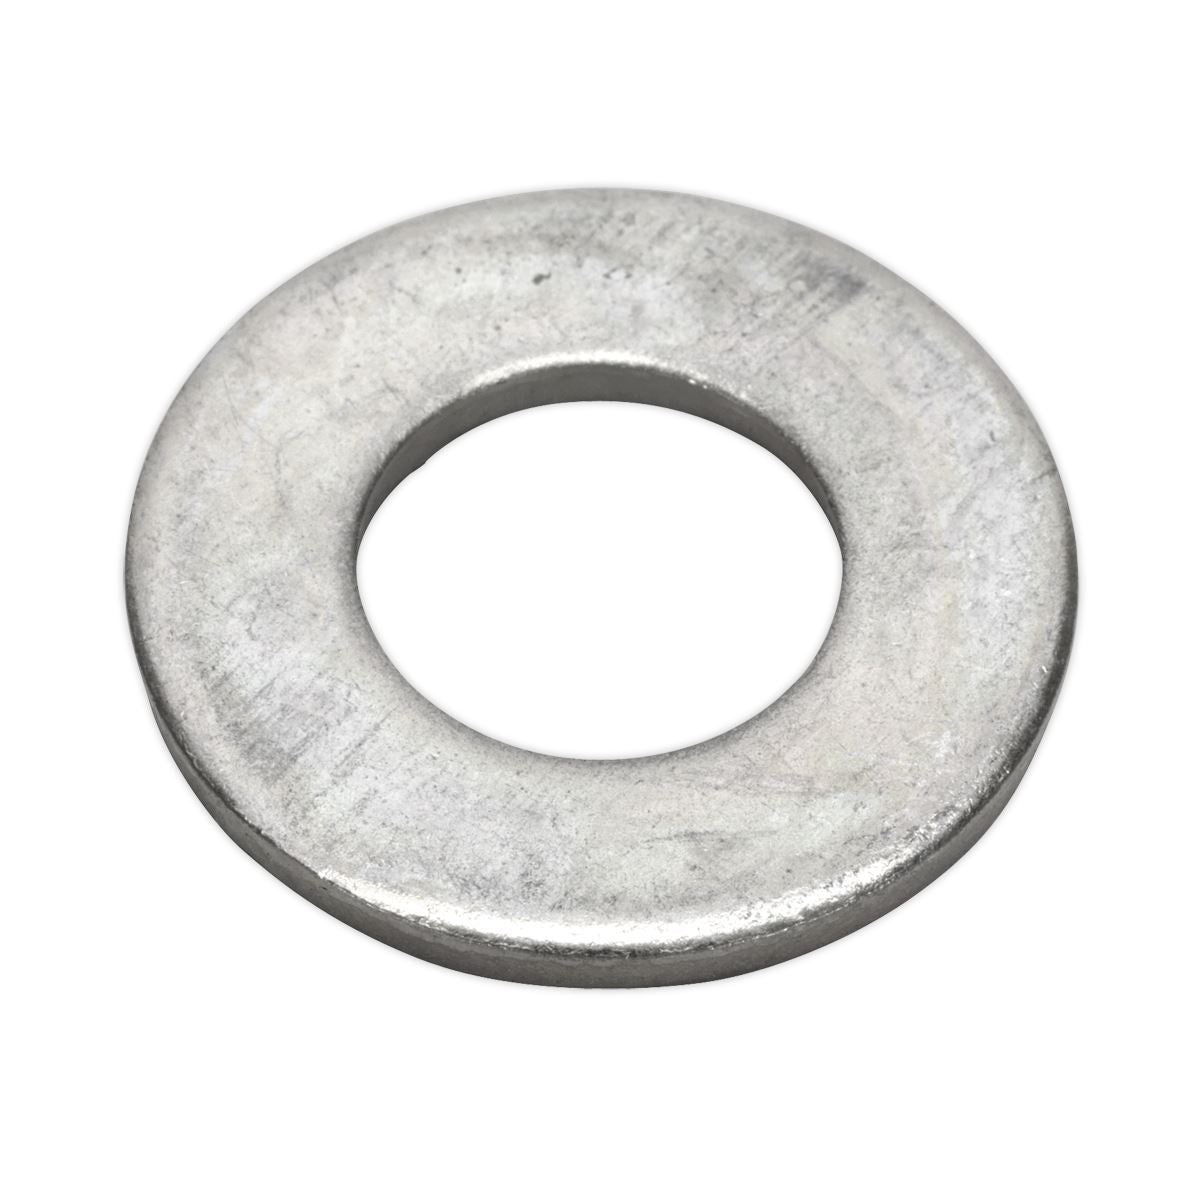 Sealey Flat Washer BS 4320 M14 x 30mm Form C Pack of 50